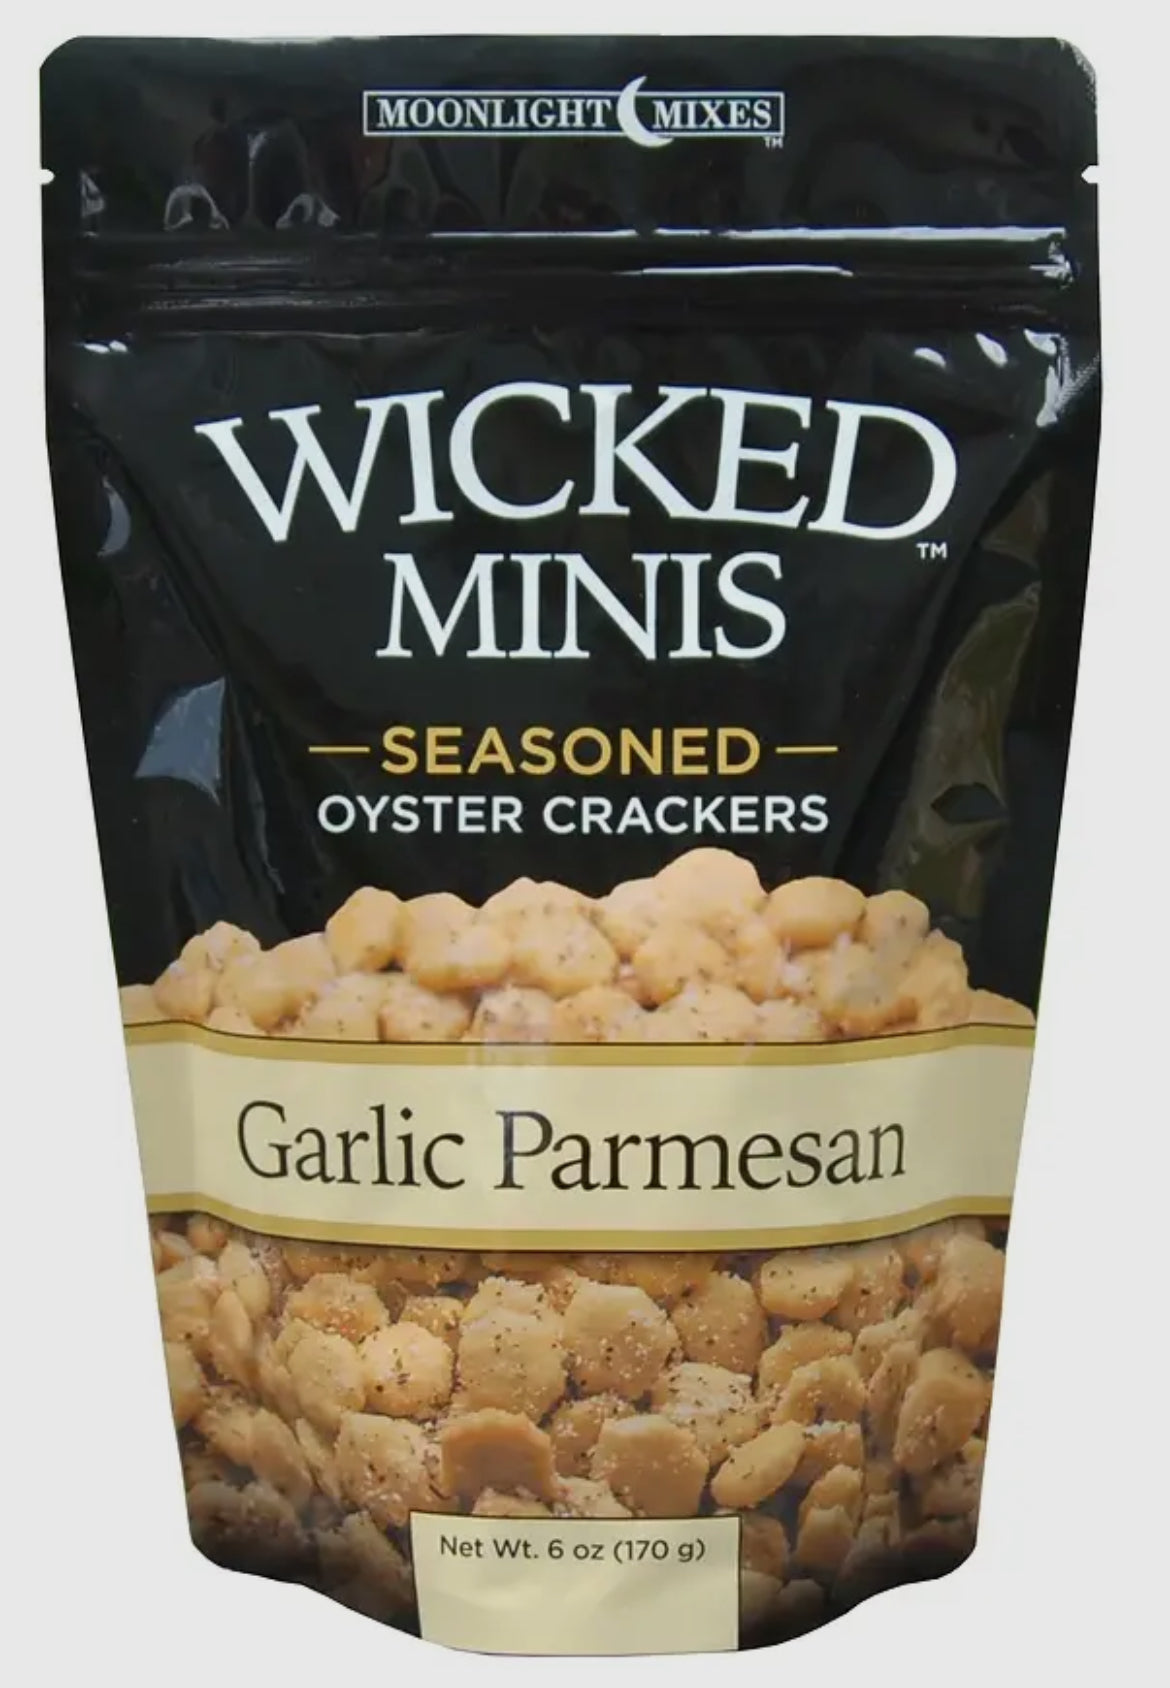 Wicked Minis Oyster Crackers